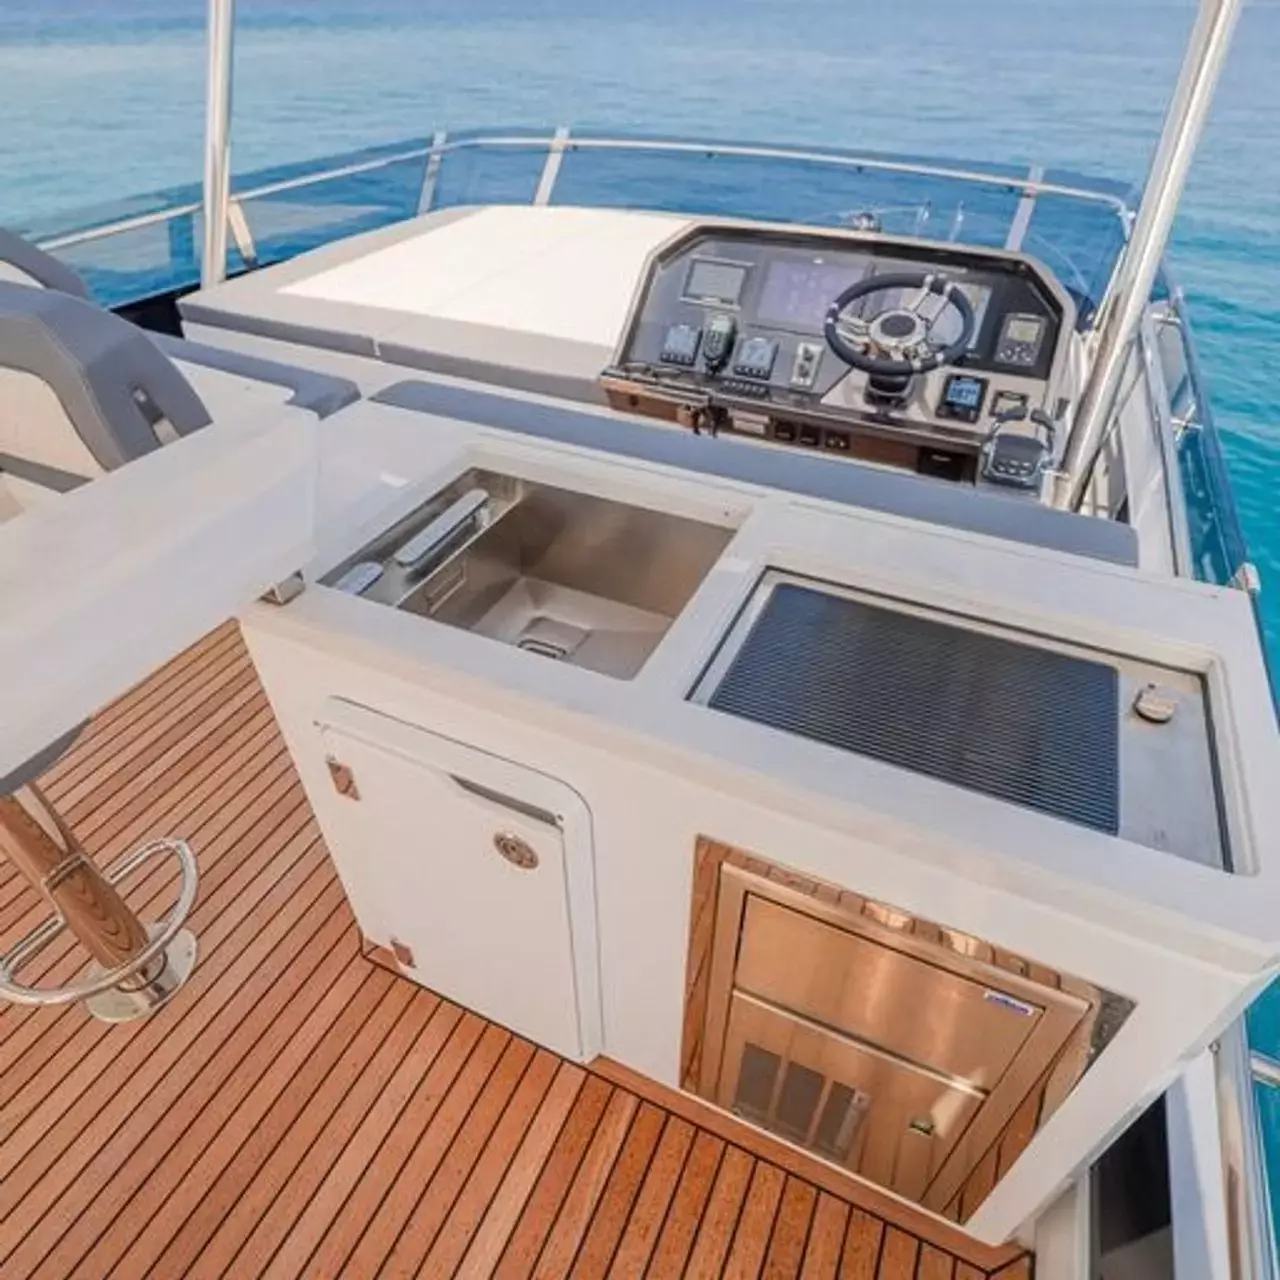 Adriatic by Galeon - Top rates for a Charter of a private Motor Yacht in Croatia